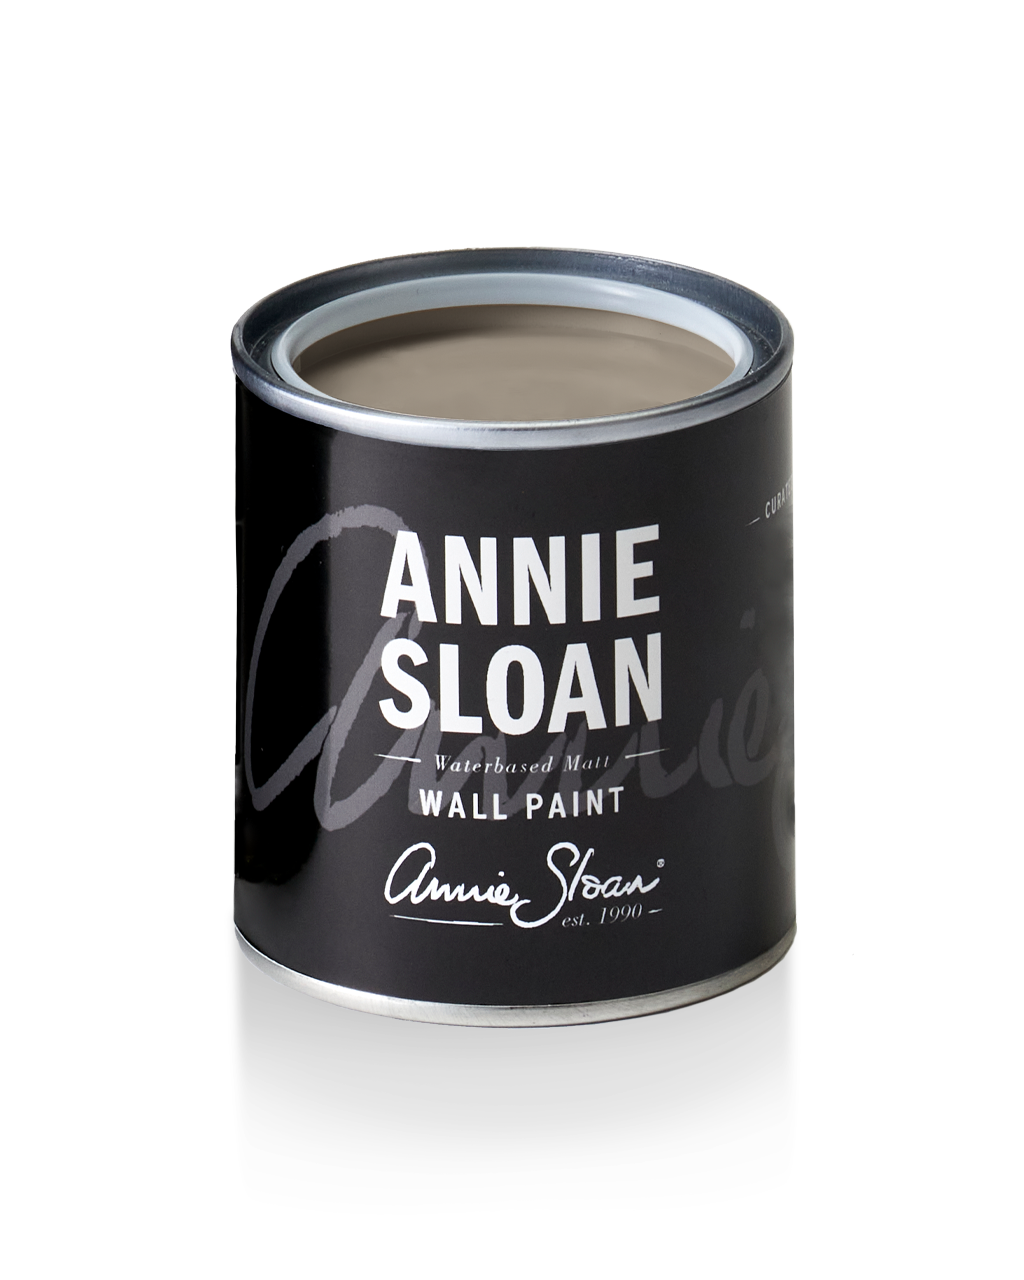 120ml of French Linen wall paint by Annie Sloan